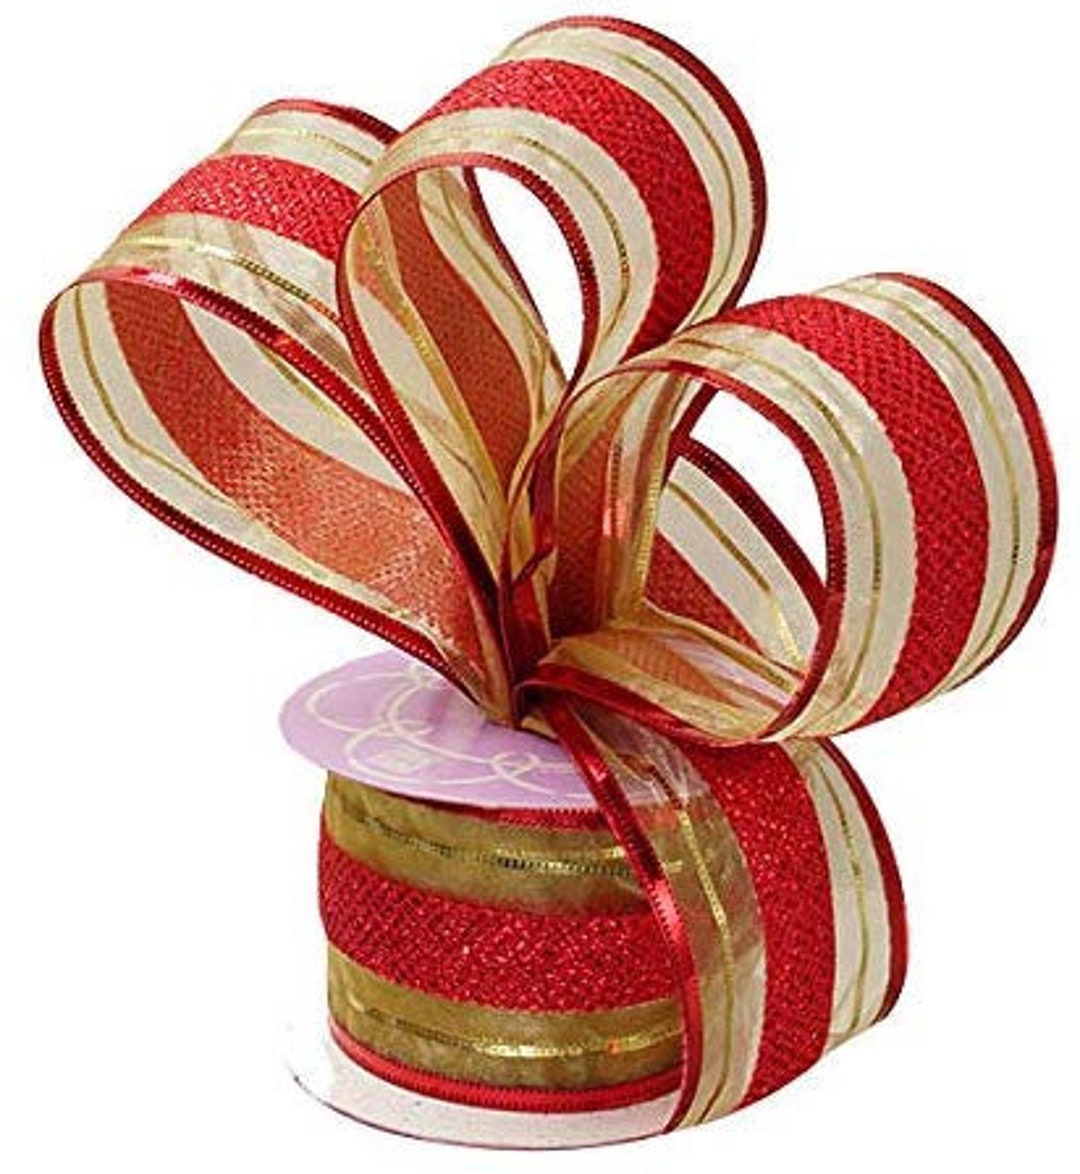 25 Yards of Red Glitter Wire Mesh Ribbon - Ideal for Christmas Tree  Decoration, Ribbon Garland, and Wreath Bow Making - 2.5 Inch Wide Red Wired